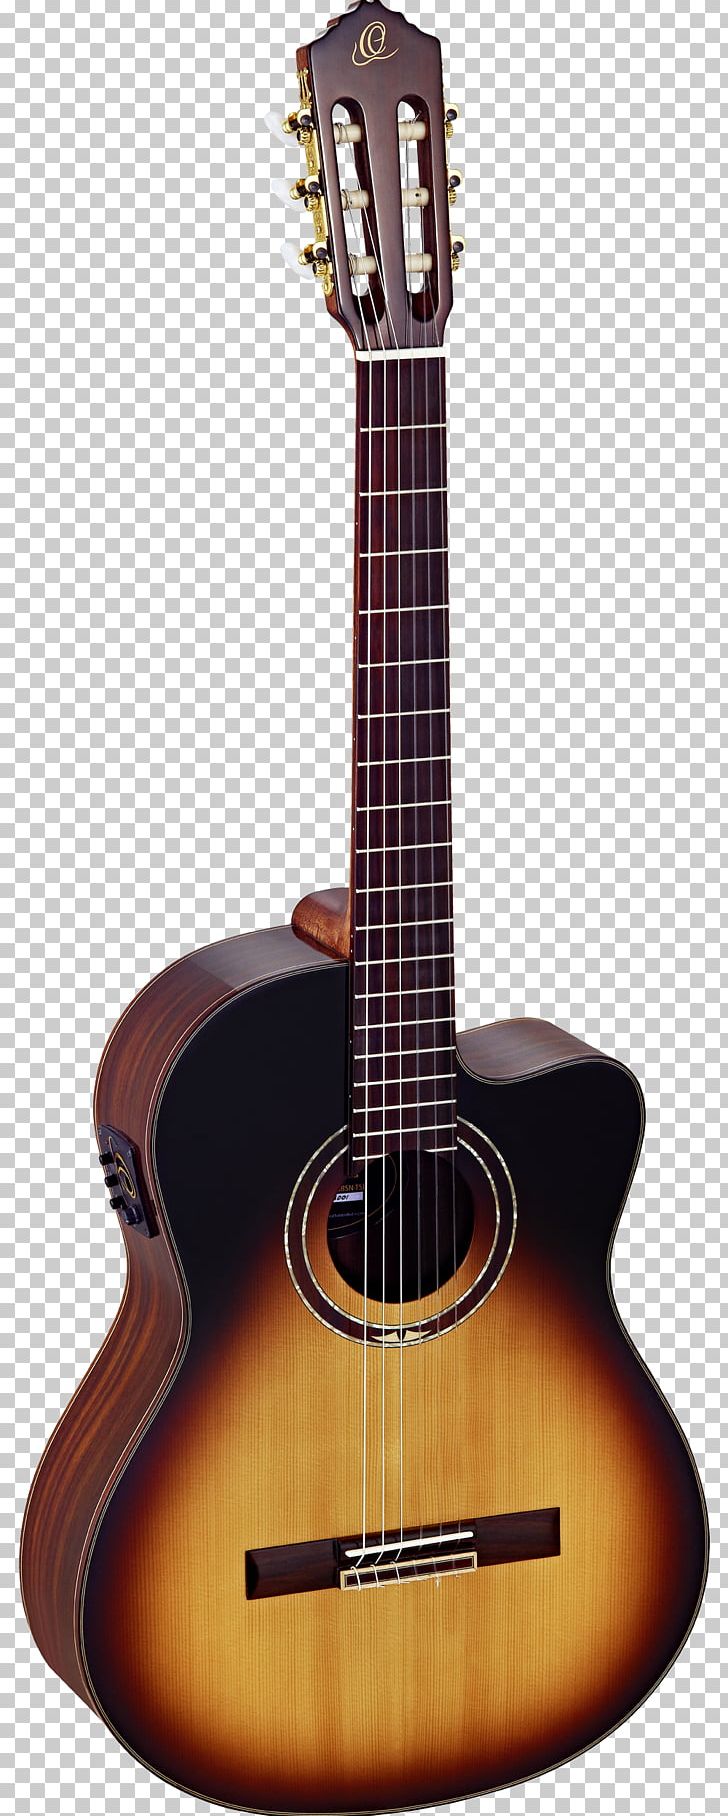 Twelve-string Guitar Classical Guitar Steel-string Acoustic Guitar PNG, Clipart, Acoustic Electric Guitar, Amancio Ortega, Classical Guitar, Cuatro, Guitar Accessory Free PNG Download